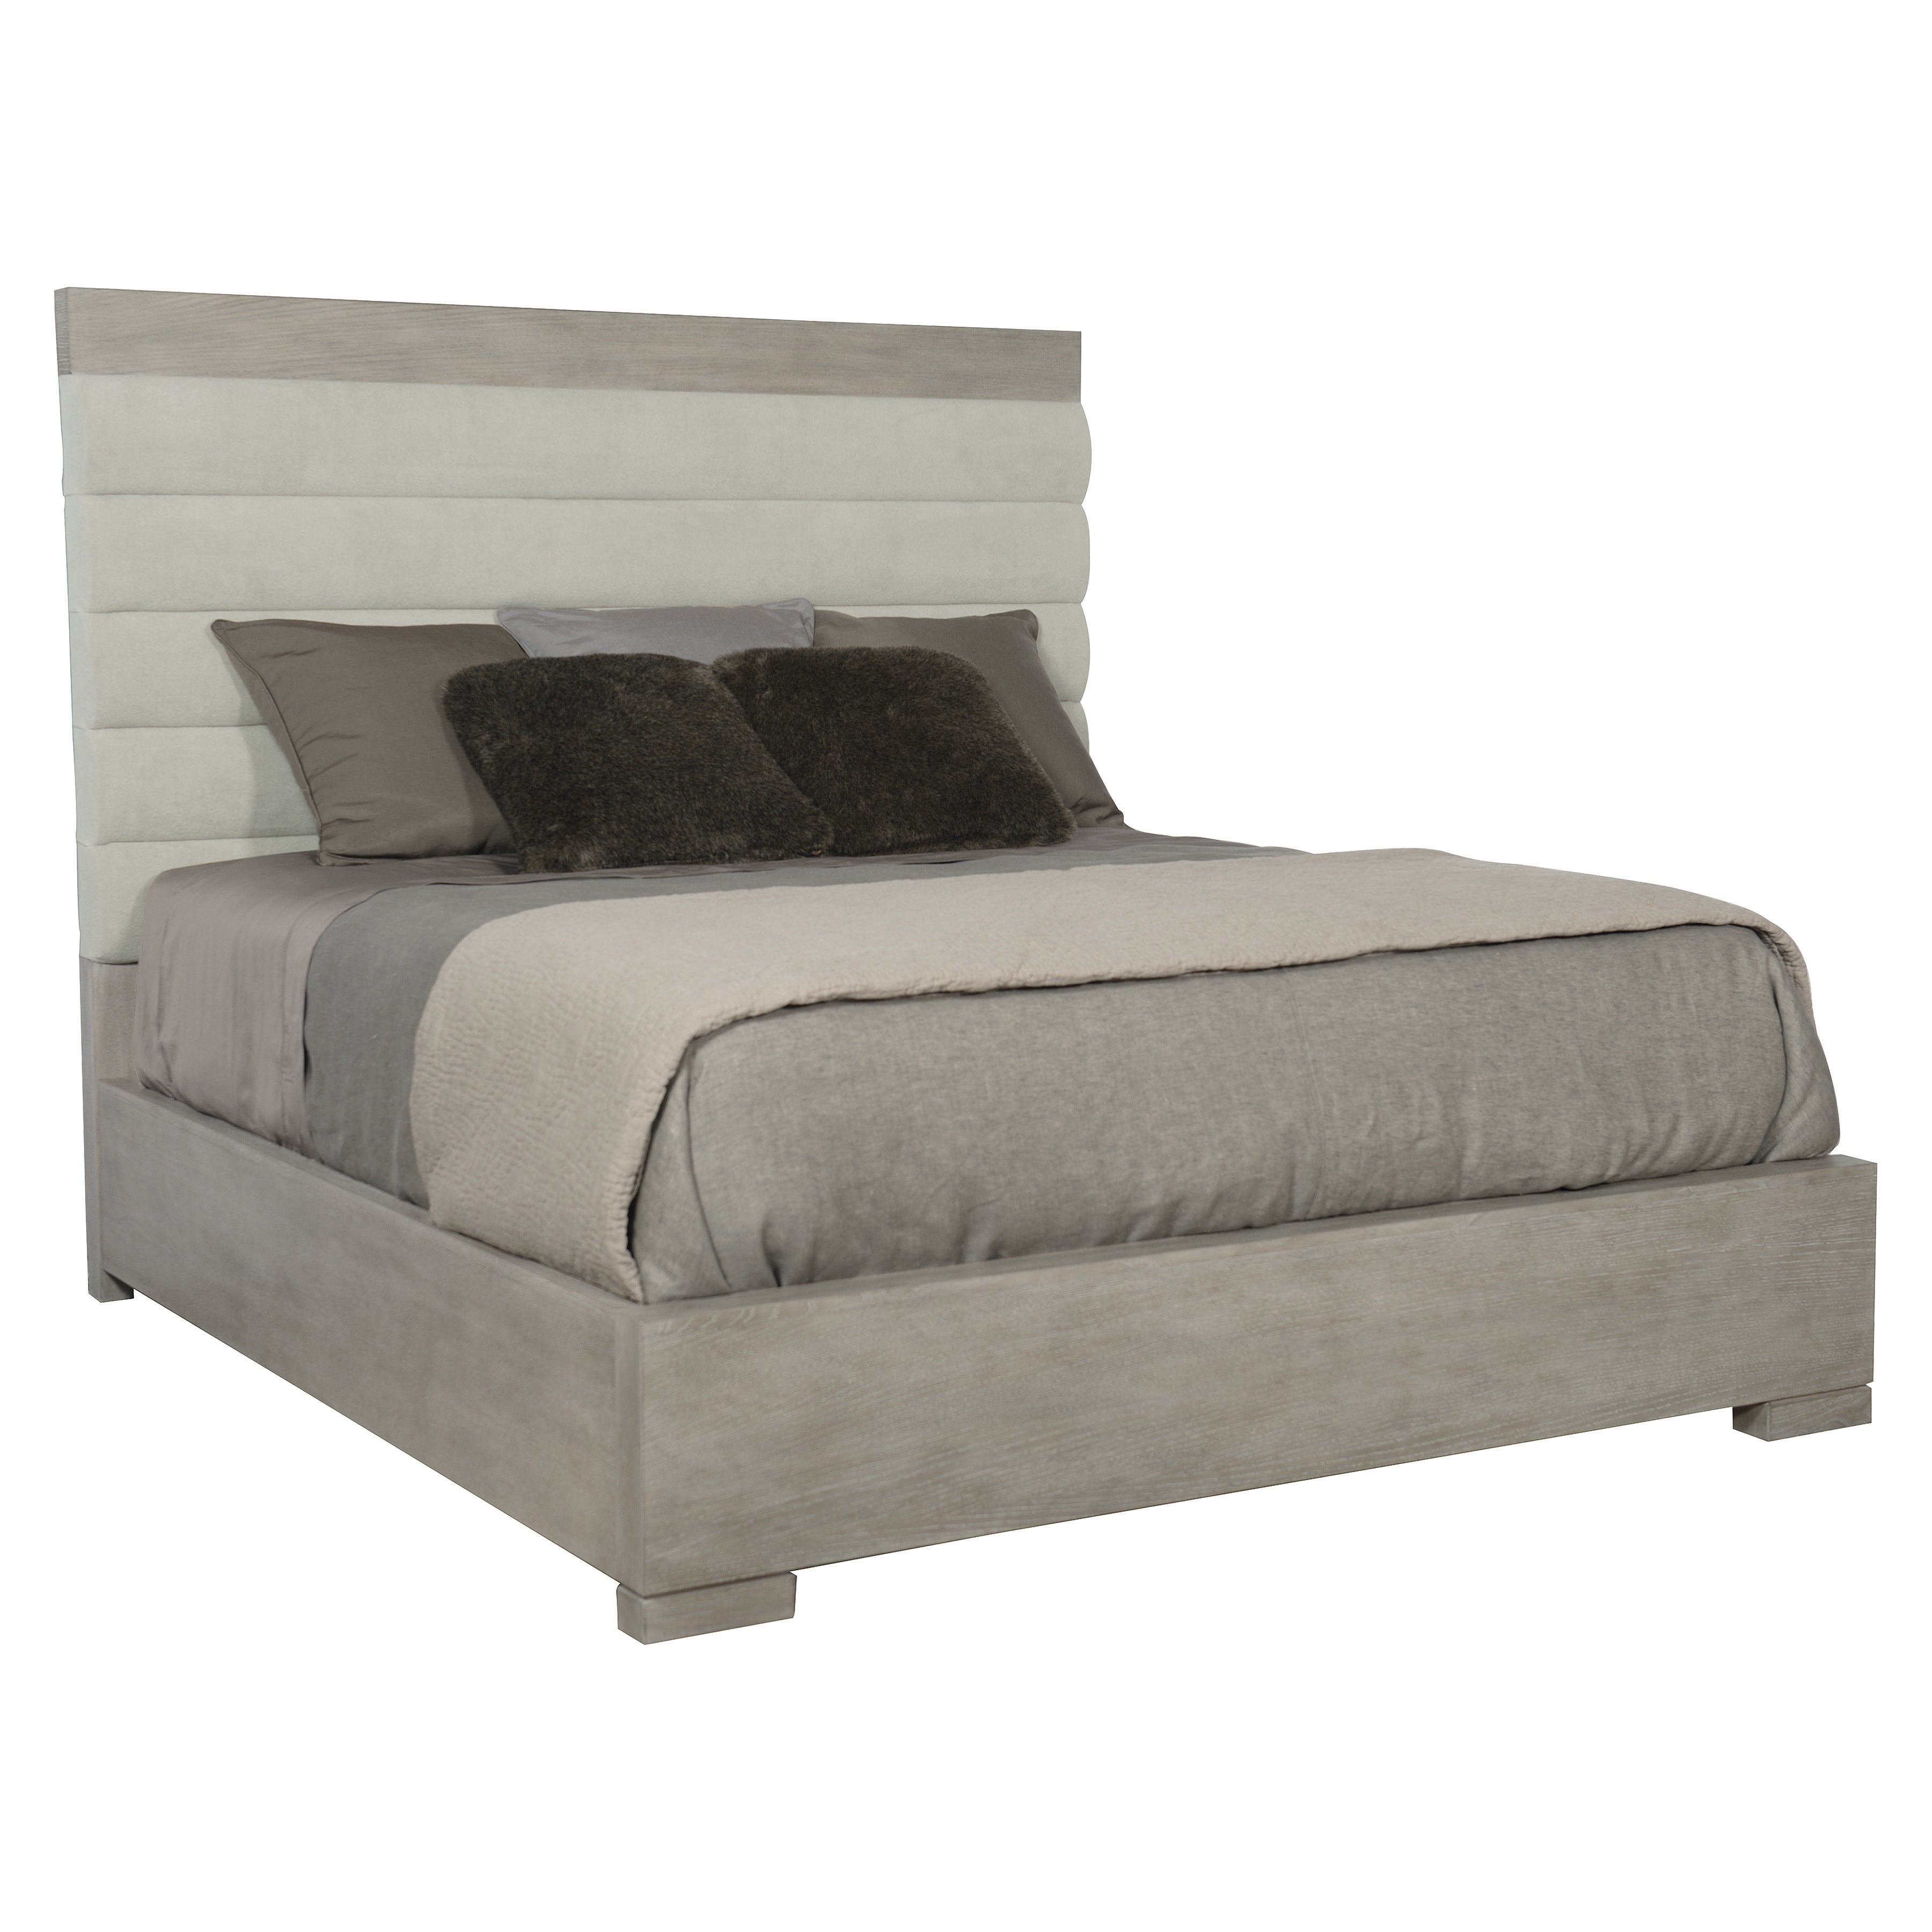 Linea Upholstered King Panel Bed with Wooden Footboard and Side Rails